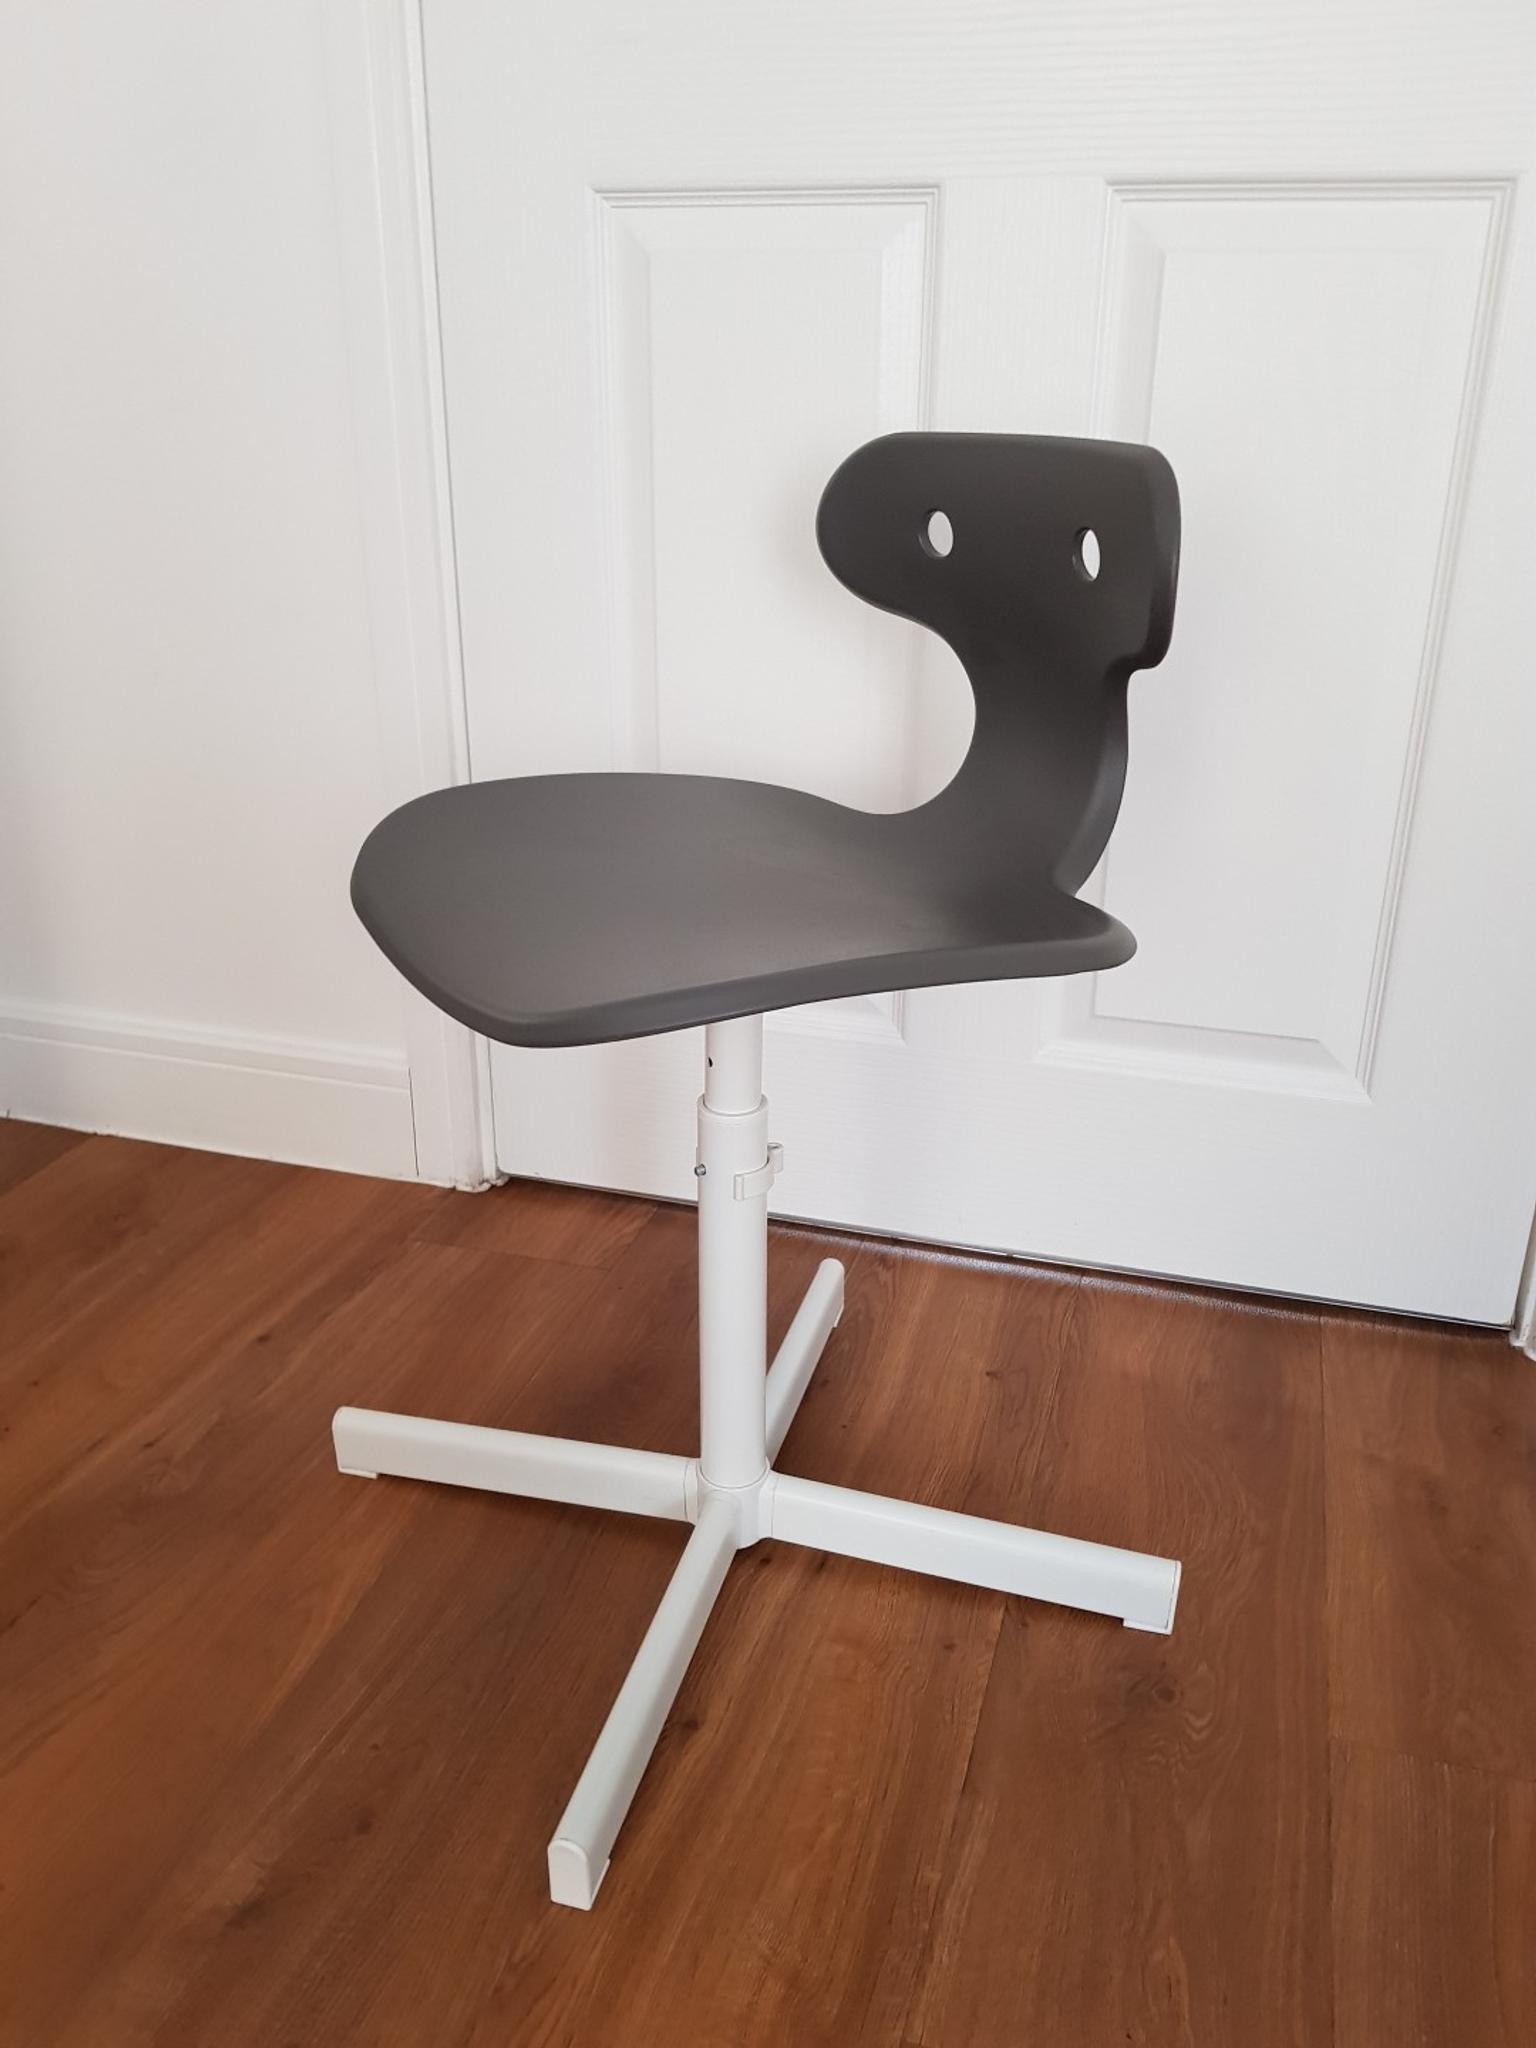 Ikea Kids Desk Chair In Ig11 London For 5 00 For Sale Shpock